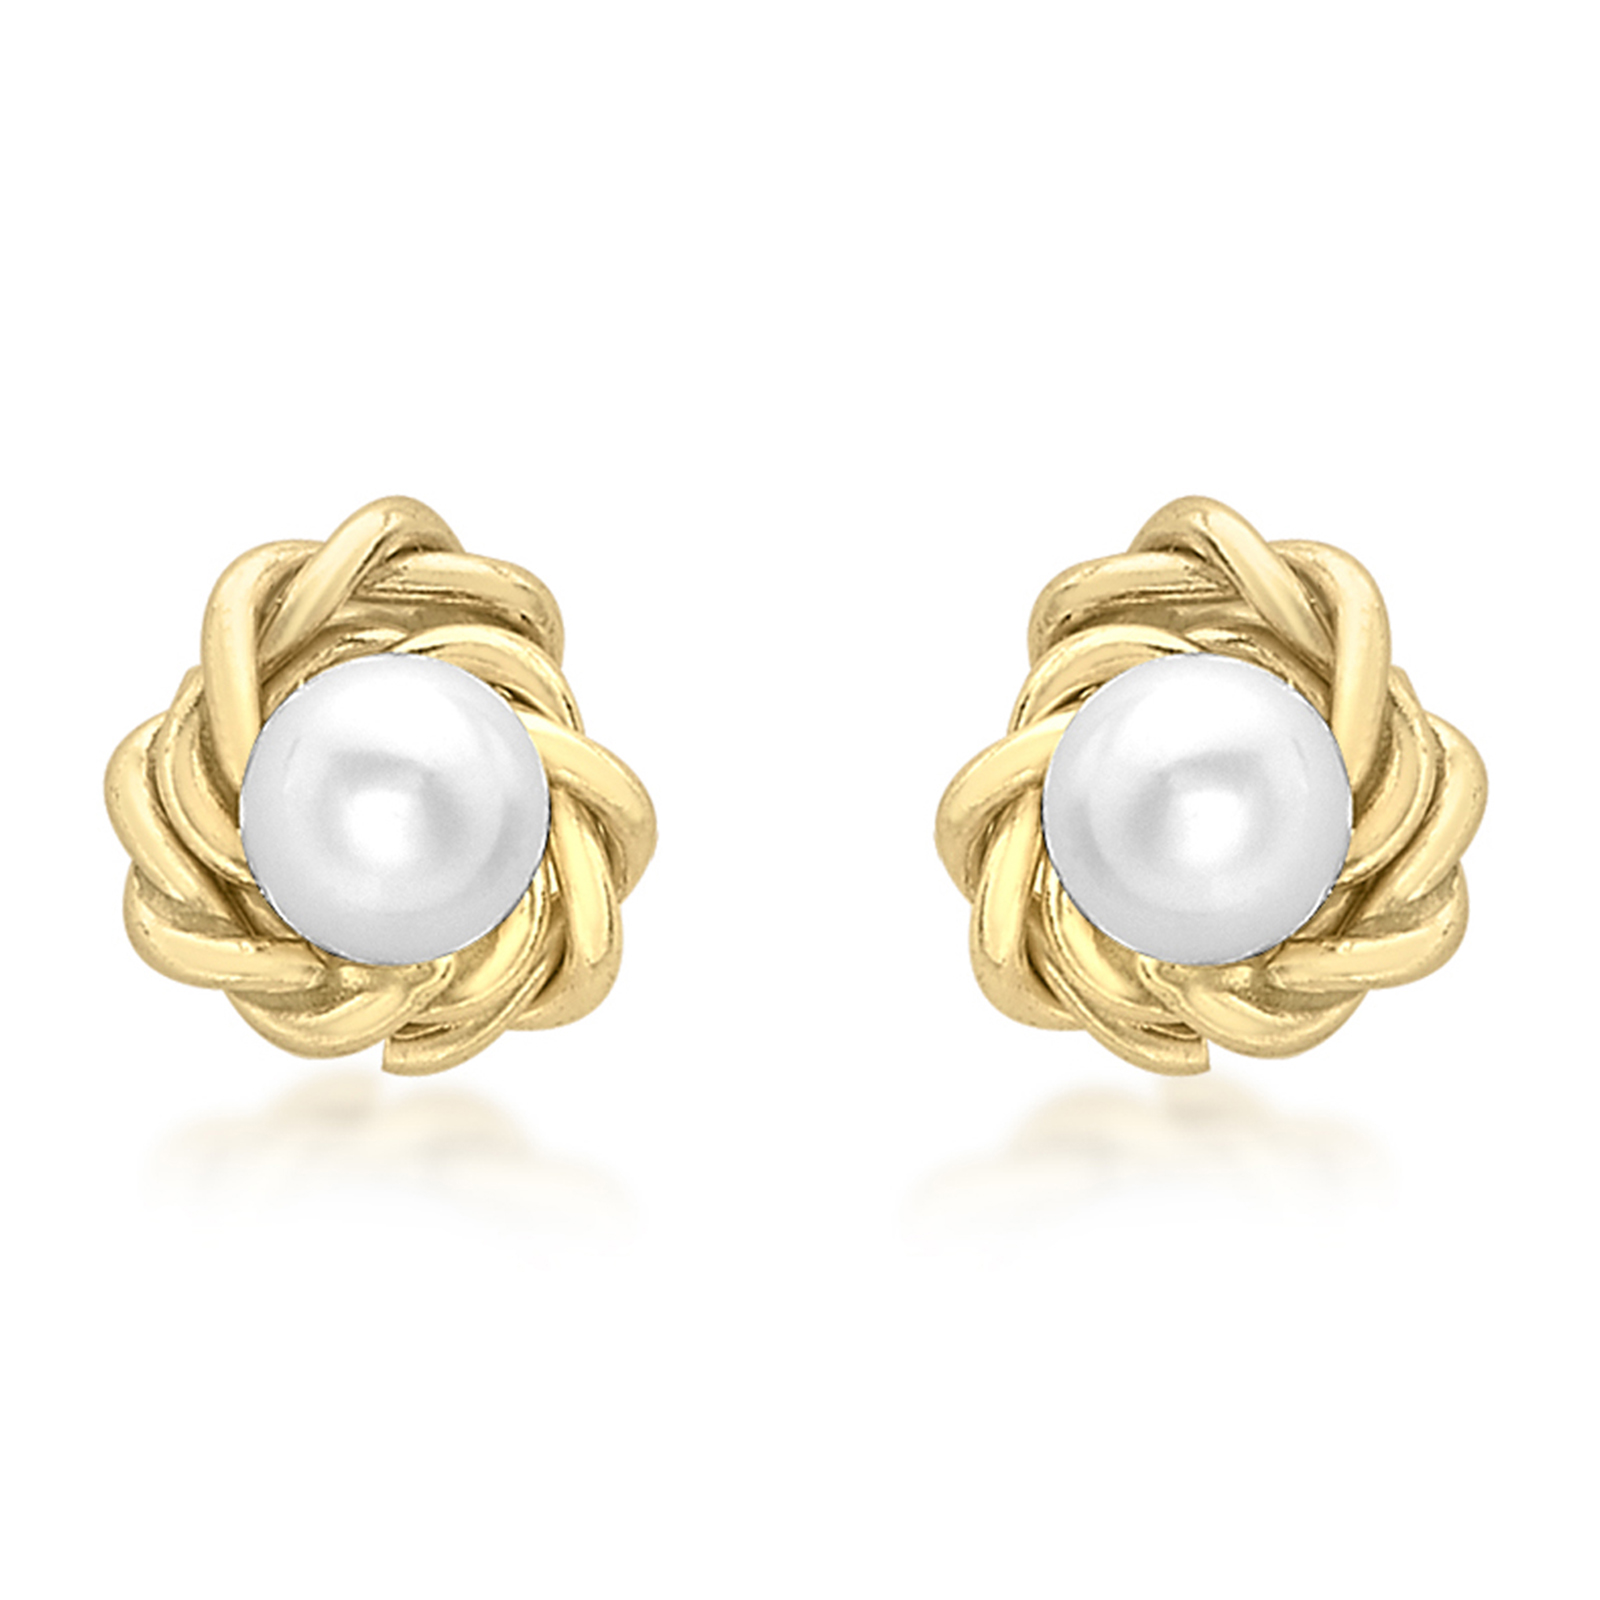 9ct Yellow Gold 5mm Knot and Pearl Stud Earrings | Earrings | Jewellery